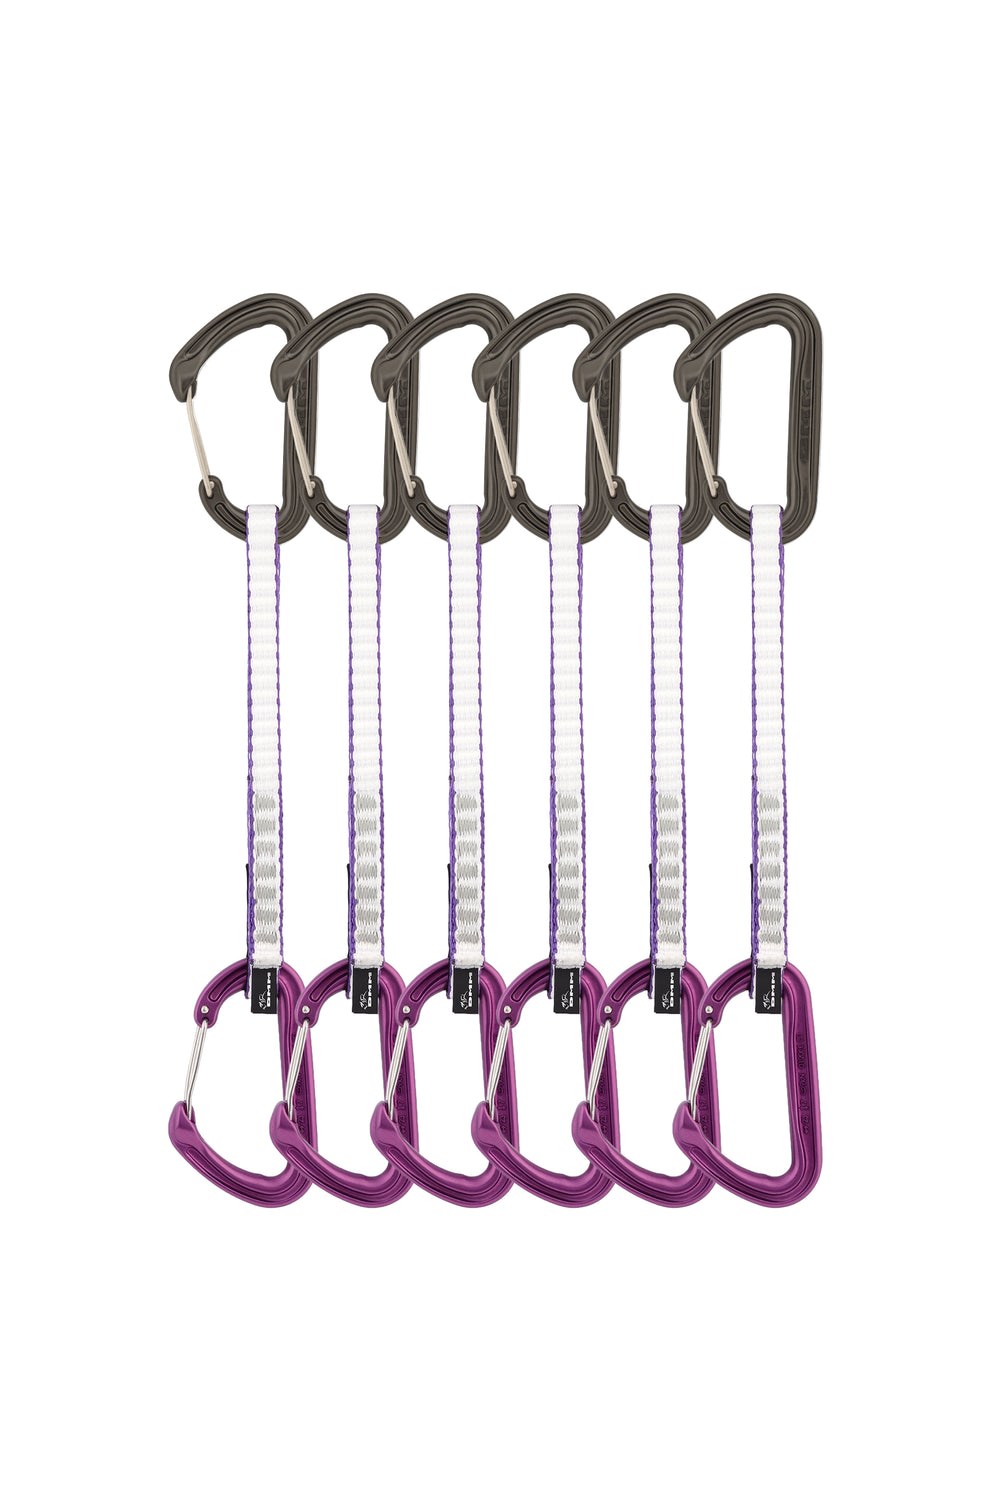 Chimera Quickdraw for Rock Climbing 6-Pack -